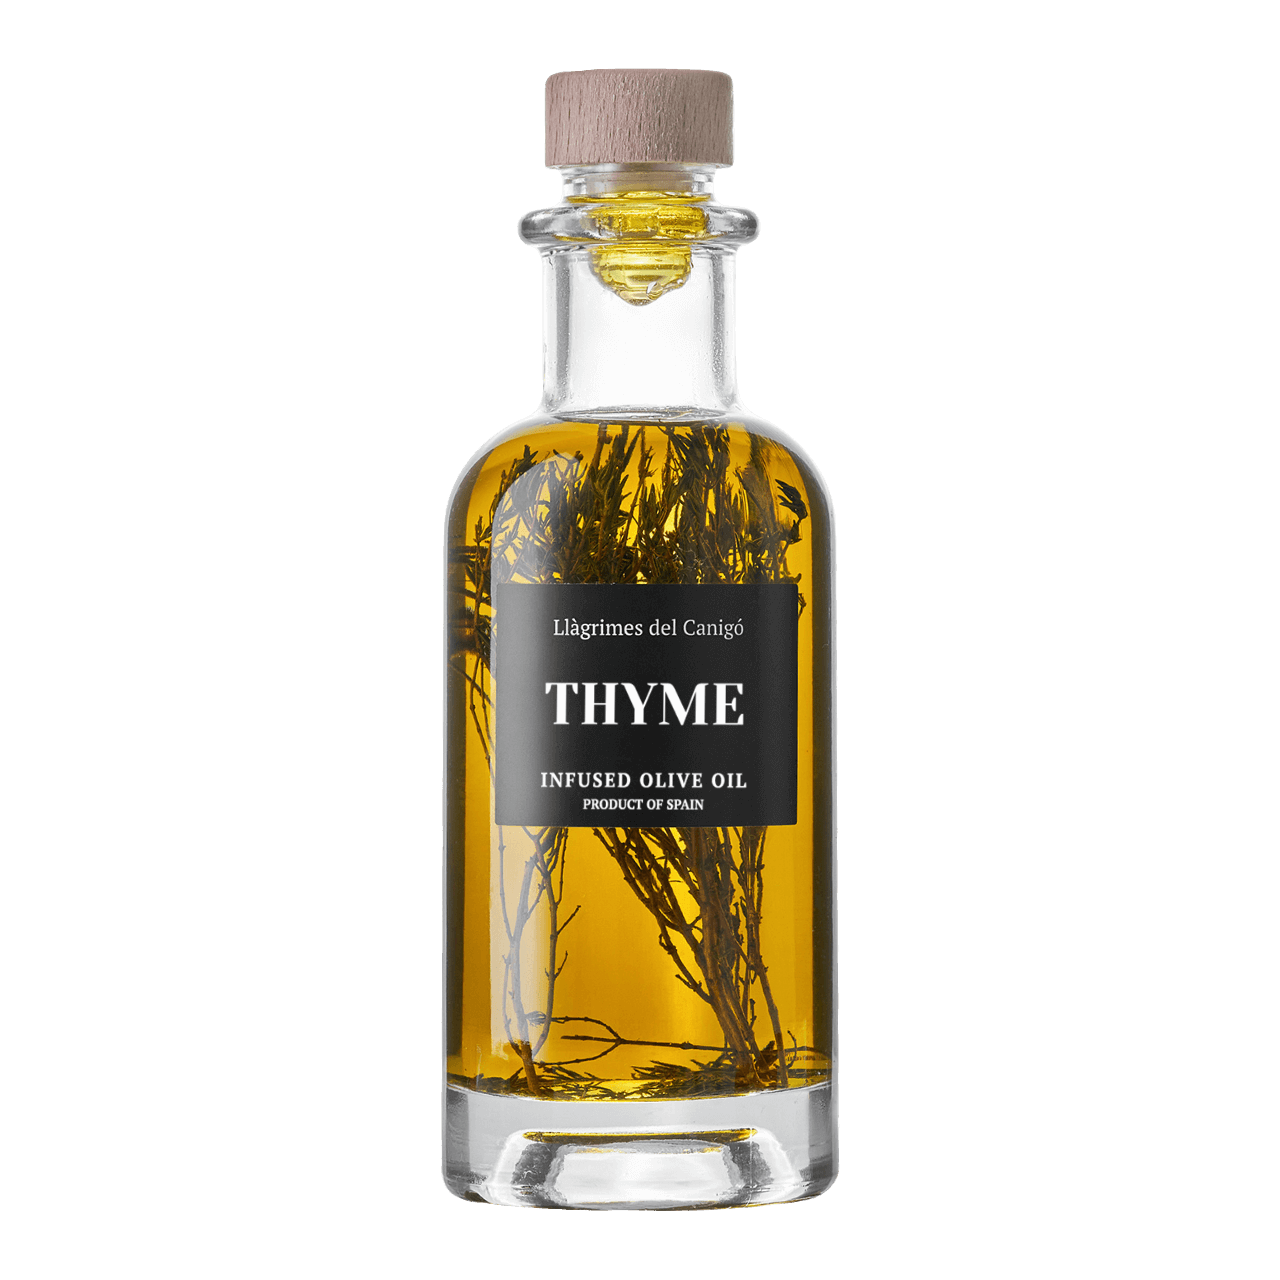 CanigoOil Thyme infused olive oil, 250ml